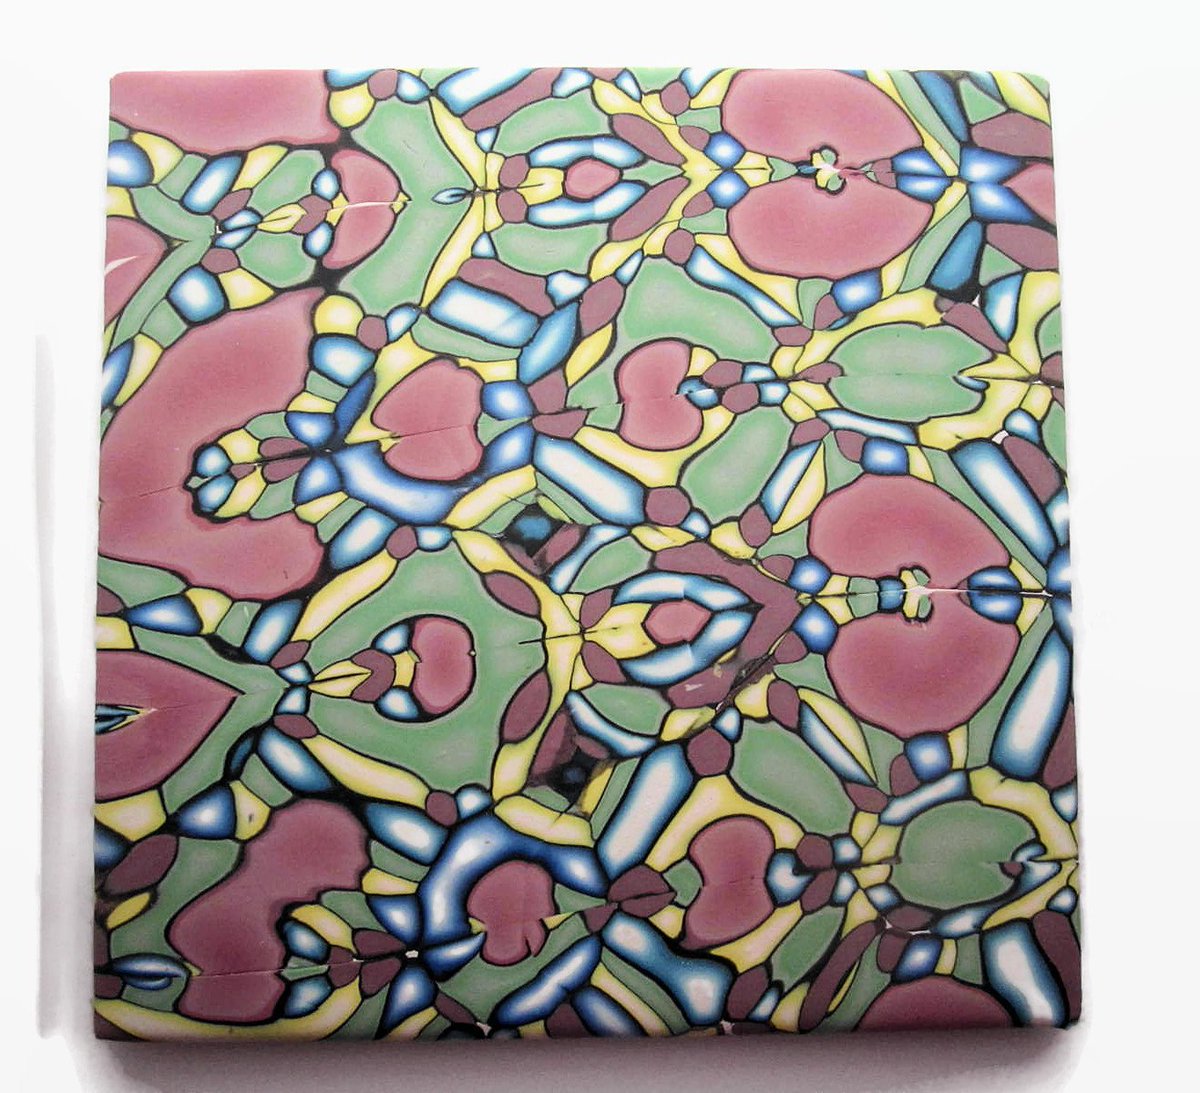 Excited to share the latest addition to my #etsy shop: 6-Inch Square Tile Trivet  etsy.me/33e0BTy #housewares #serving #artcoaster #decorativecoaster #tilecoaster #tiletrivet #trivet #decorativetrivet #tablecoaster   marcympc.etsy.com